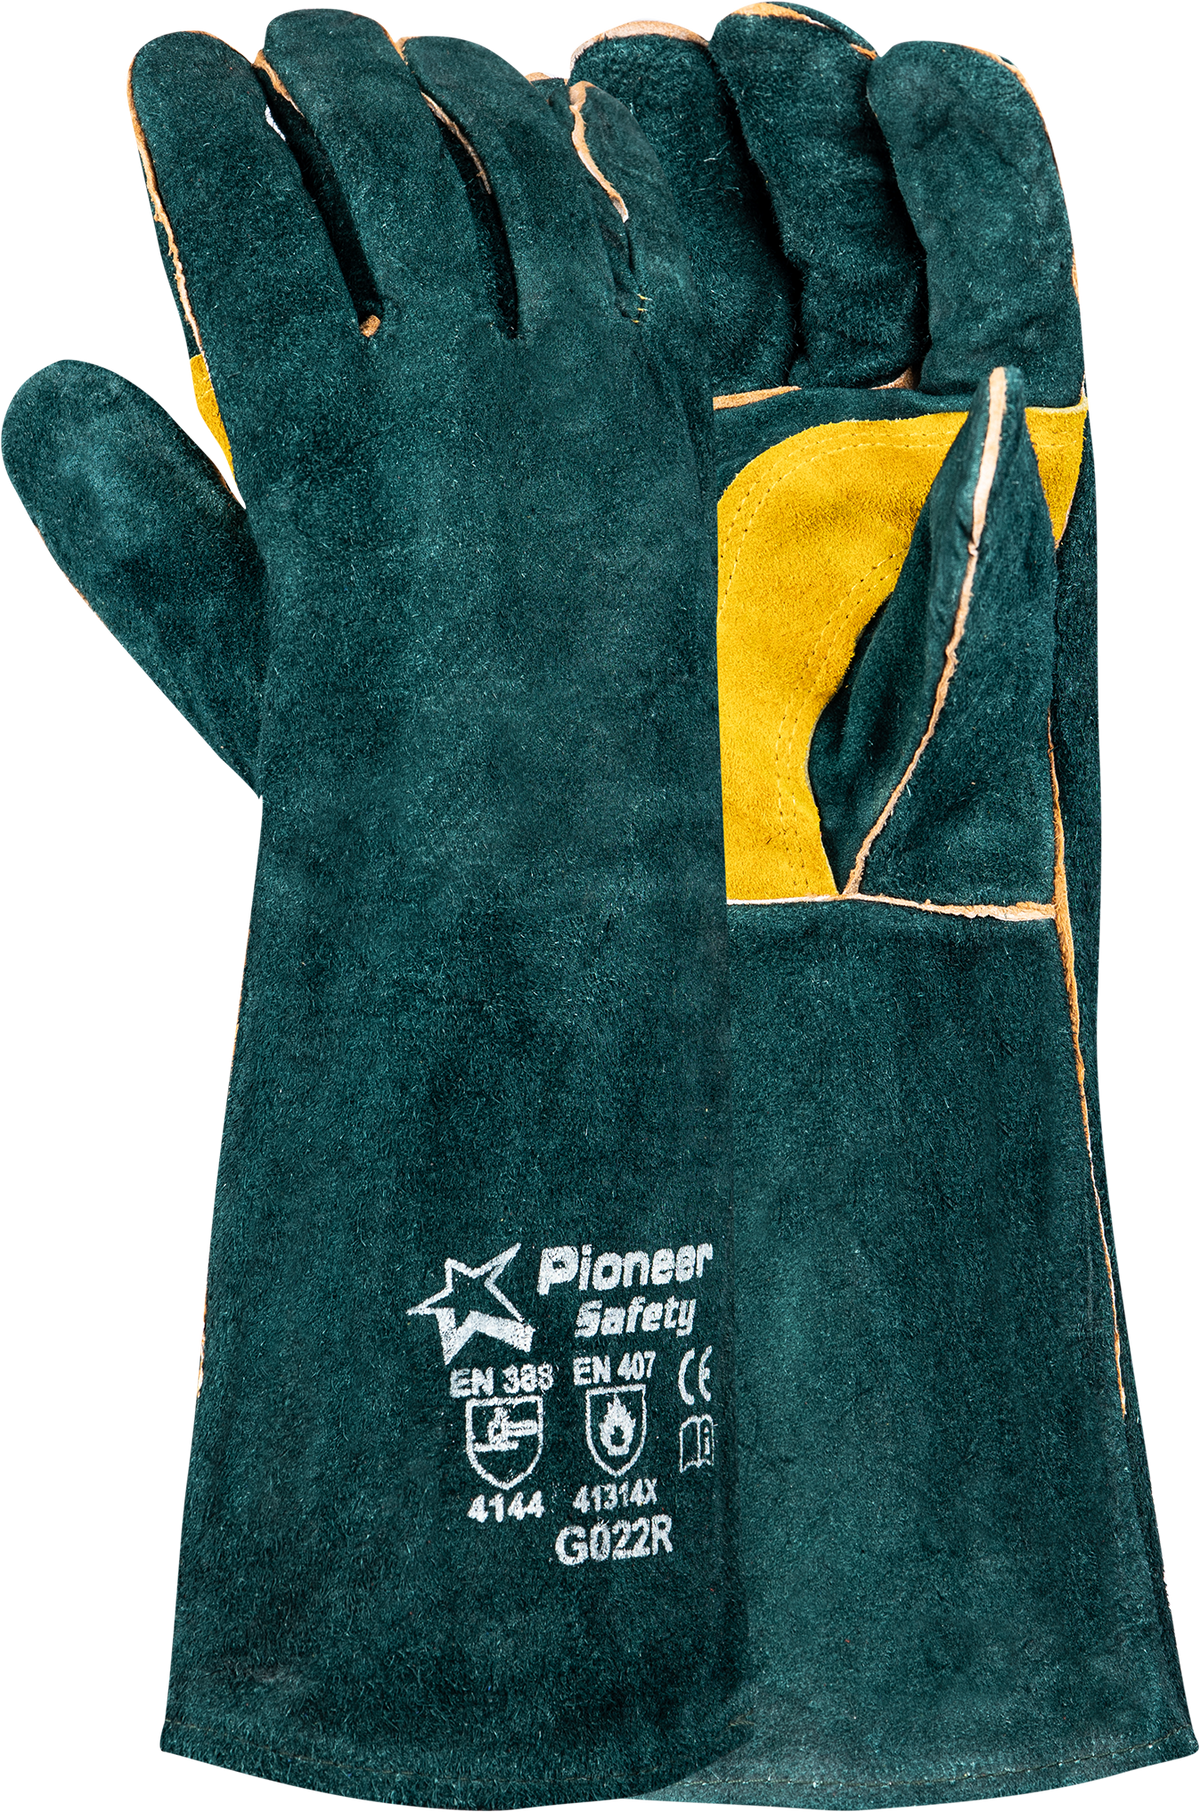 PIONEER Leather Green Reinforced Palm - Gauntlet